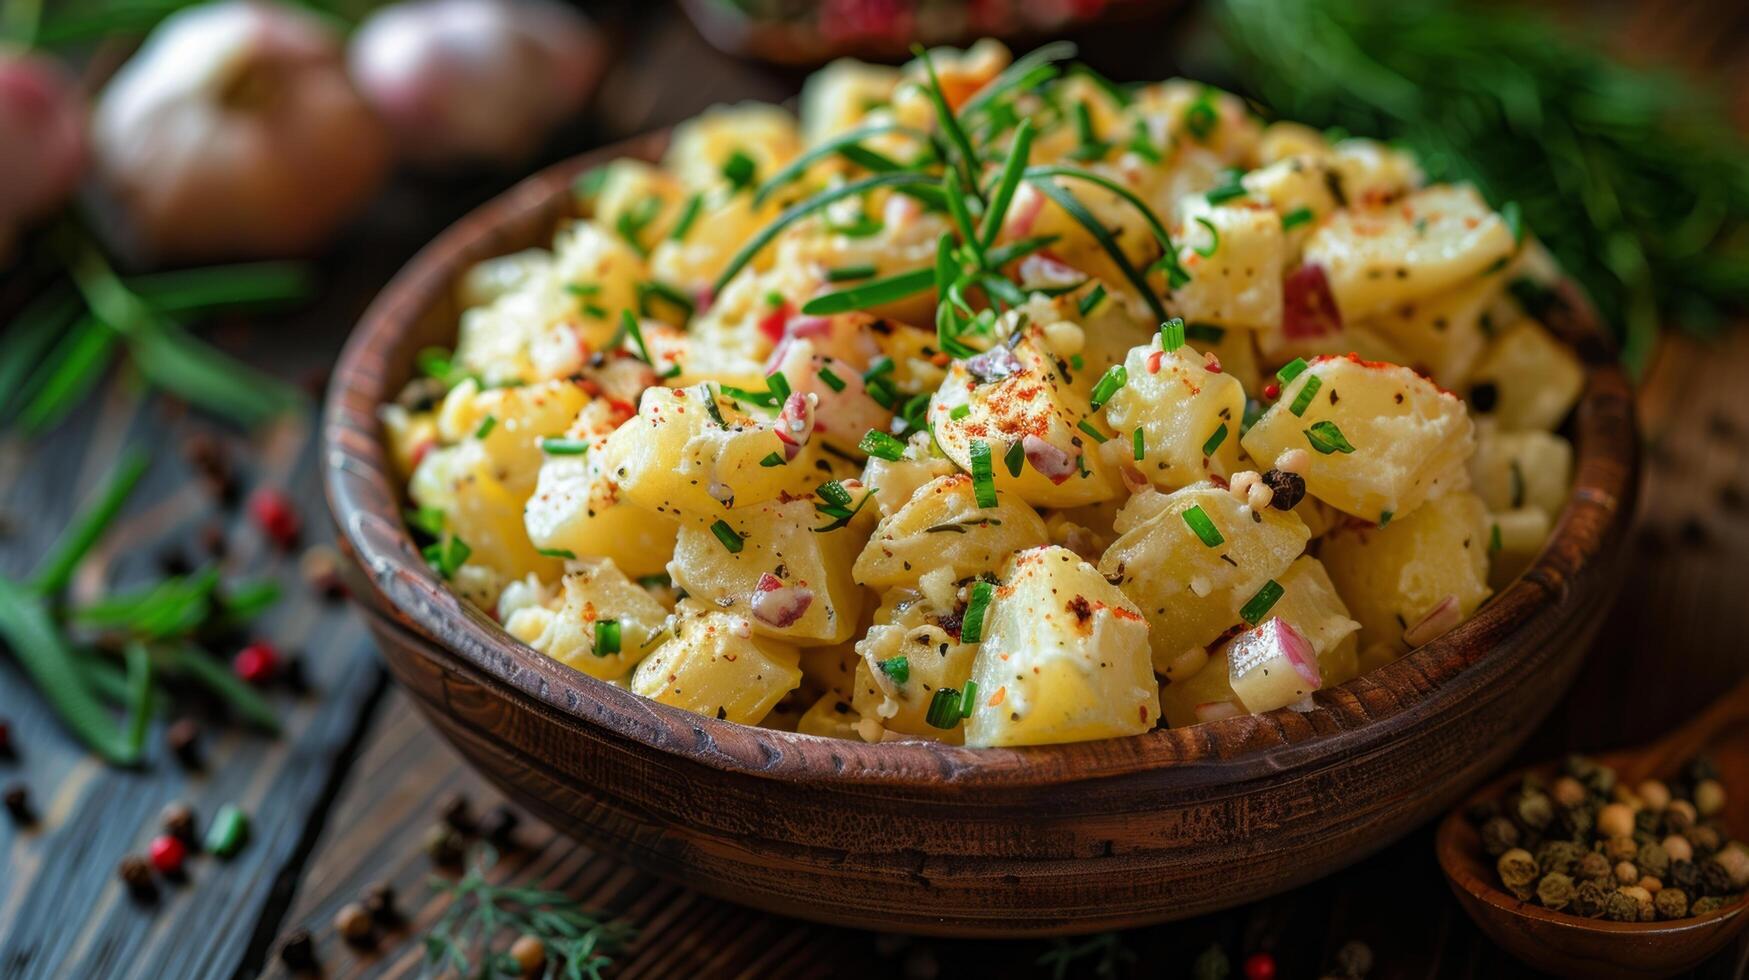 Wooden Bowl Filled With Potato Salad on Table photo